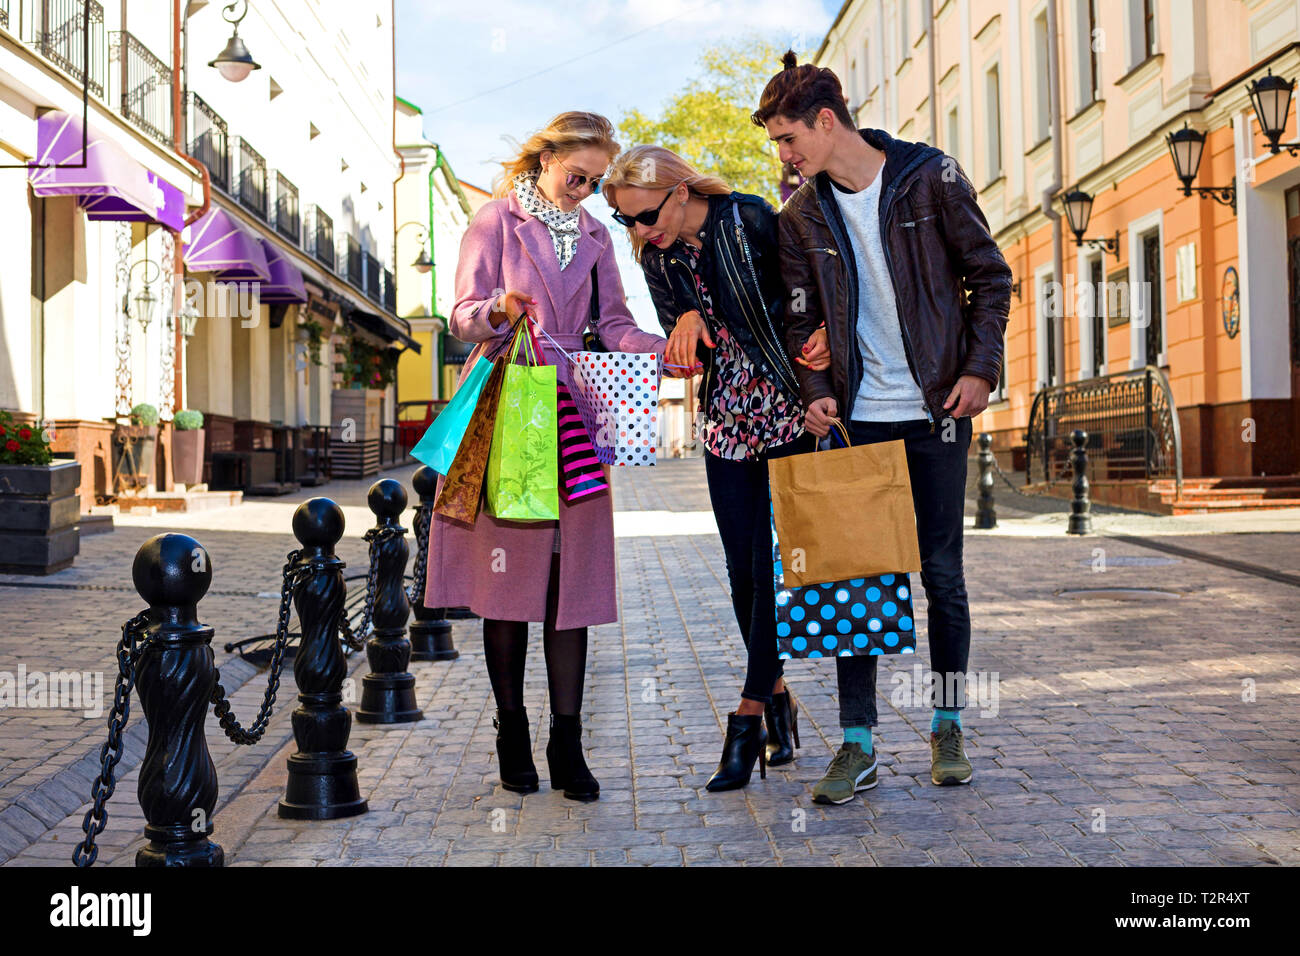 Happy Young two business girls blondes in glasses and a brunet guy walk down the street and enjoy shopping, shopping bags, gifts in their hands. Consu Stock Photo